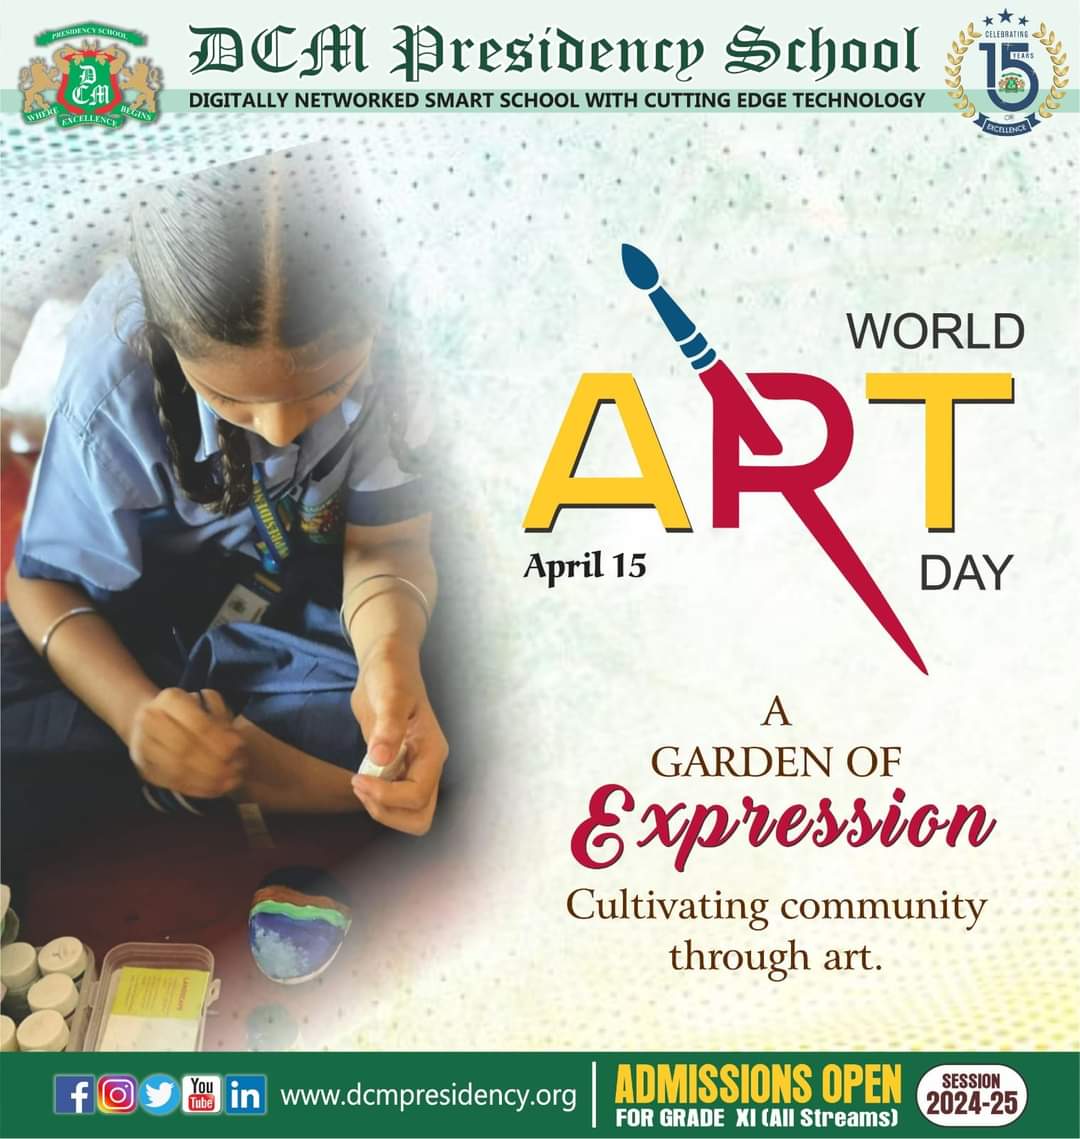 'Every human is an artist. The dream of your life is to make beautiful art.' — Don Miguel Ruiz. #BestSchoolInLudhiana #DCMP #art #worldartday